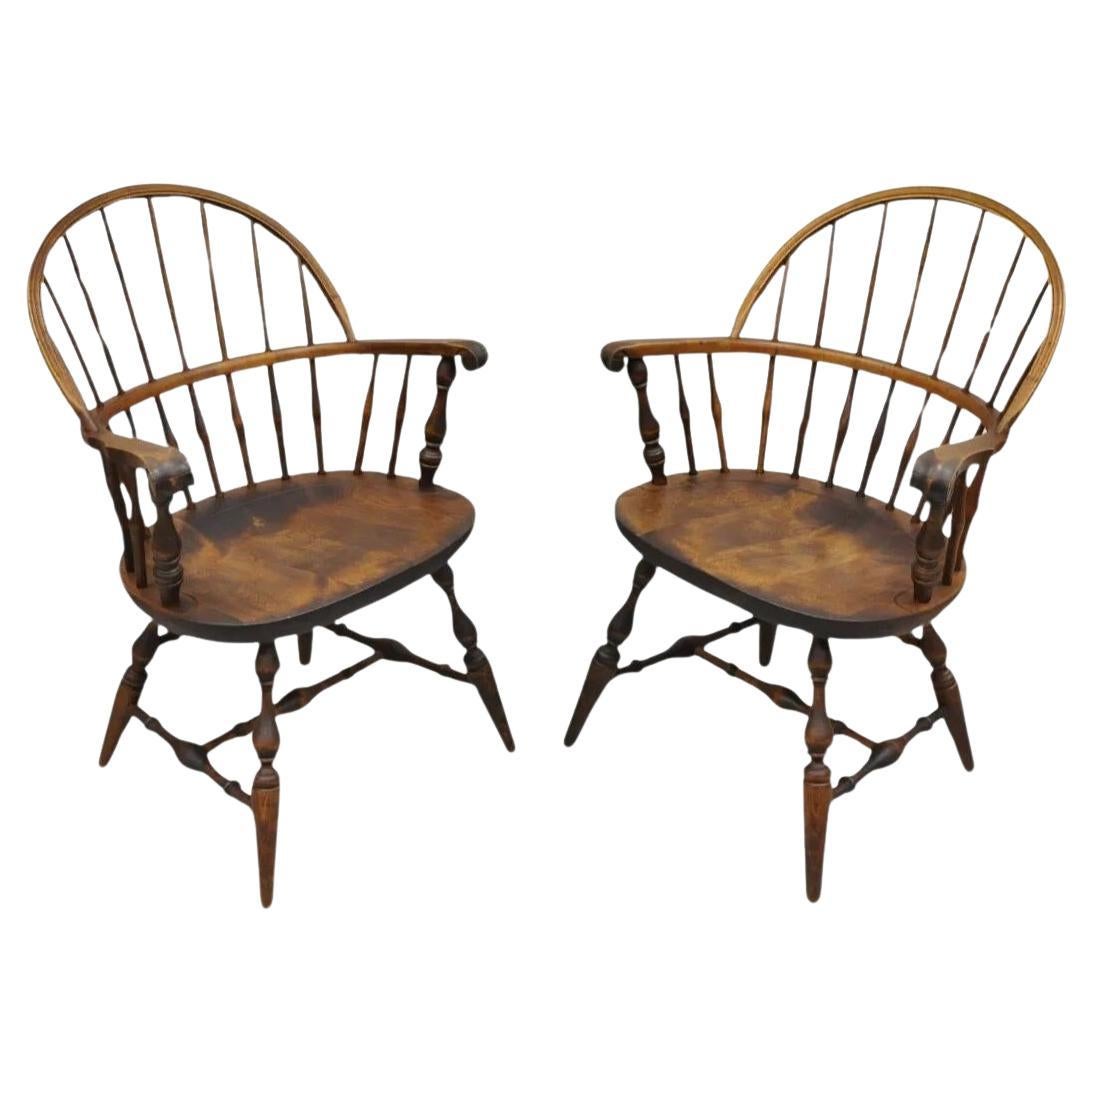 Nichols & Stone Rock Maple Wood Bowback Colonial Windsor Arm Chairs - a Pair For Sale